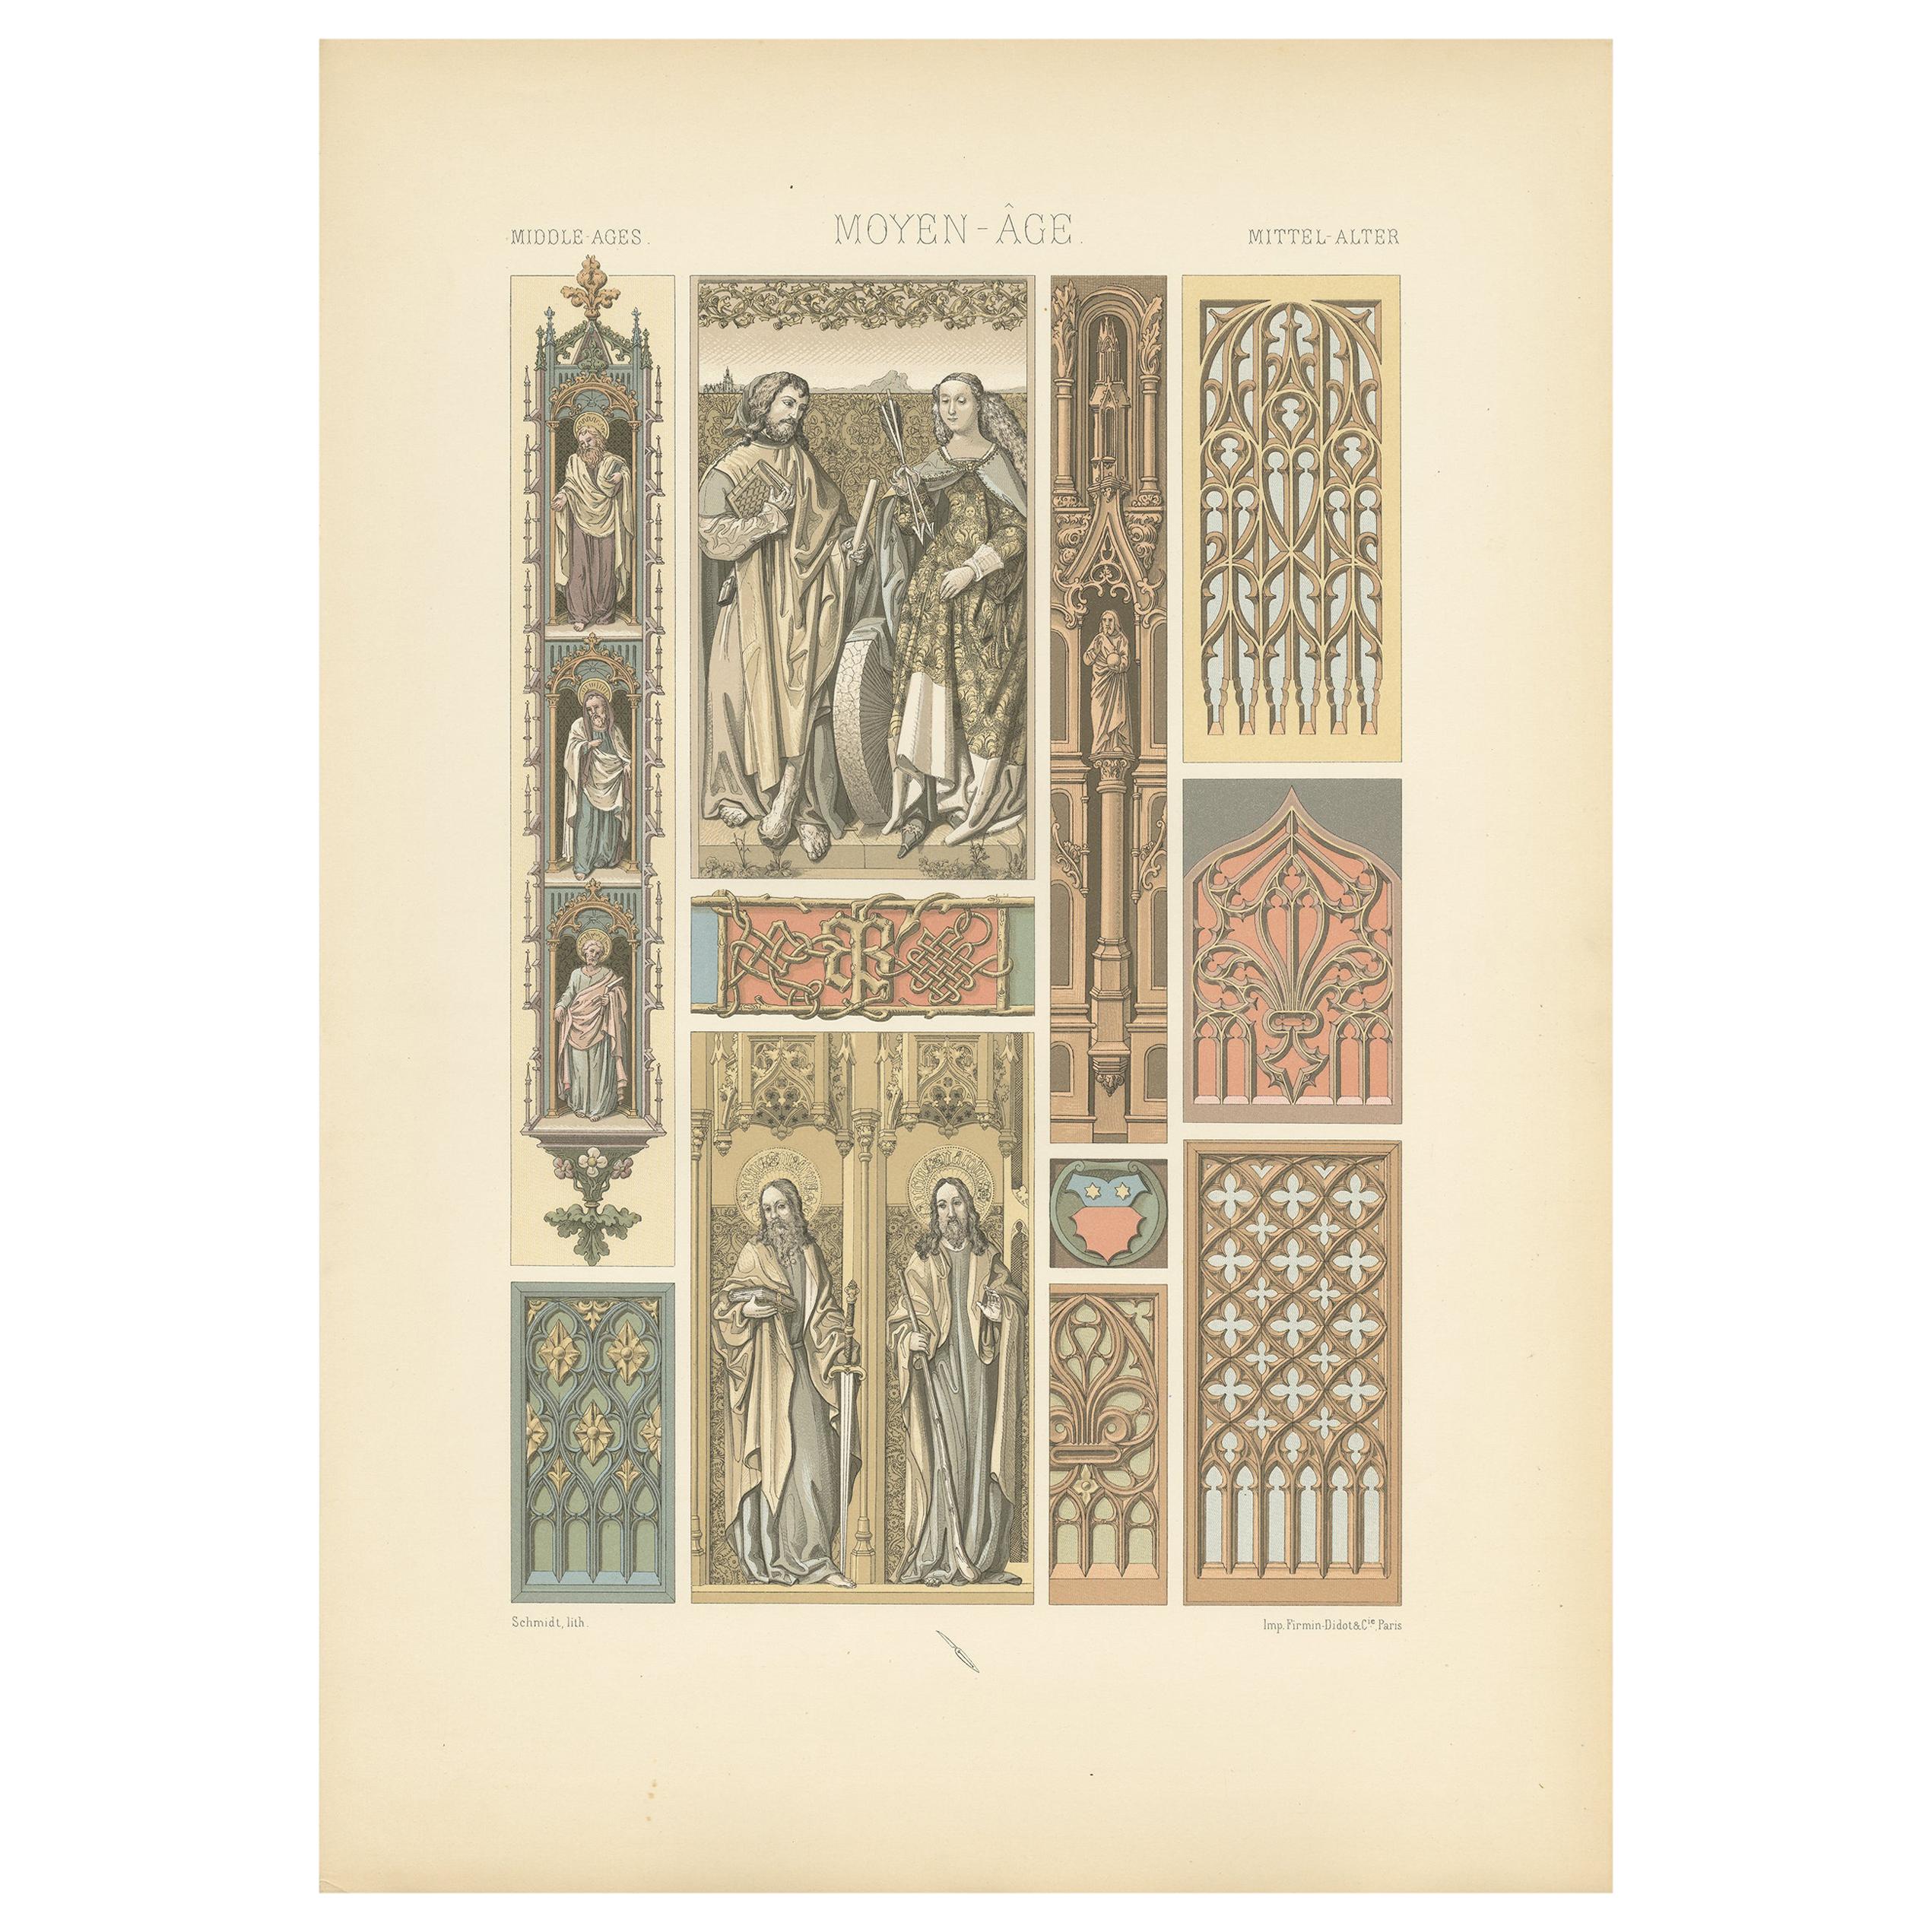 Pl. 62 Antique Print of Middle Ages Motifs from Woodwork by Racinet 'circa 1890'